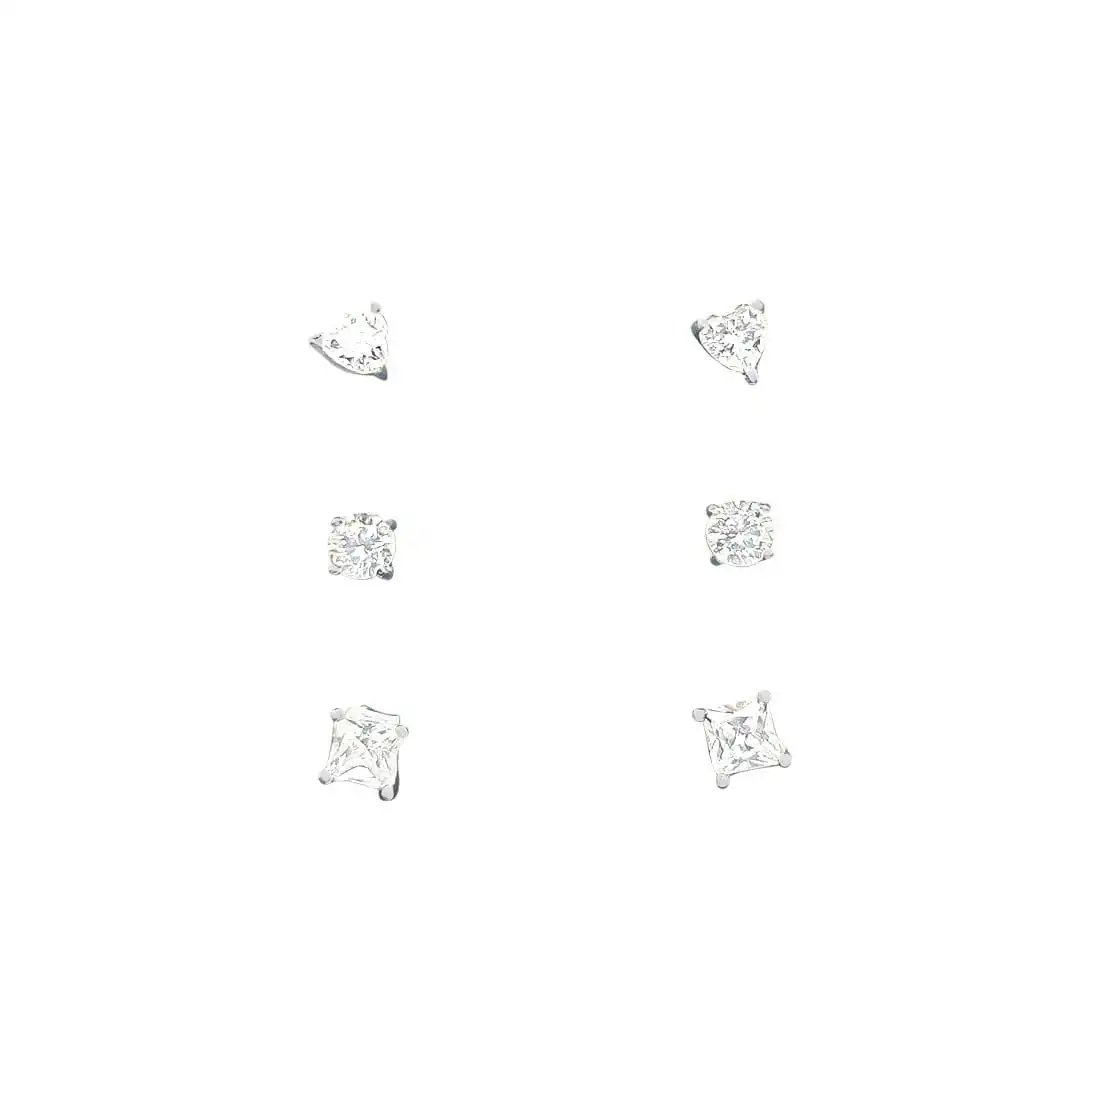 4mm Children's Sterling Silver 3pc Stud Earring Set with Cubic Zirconia